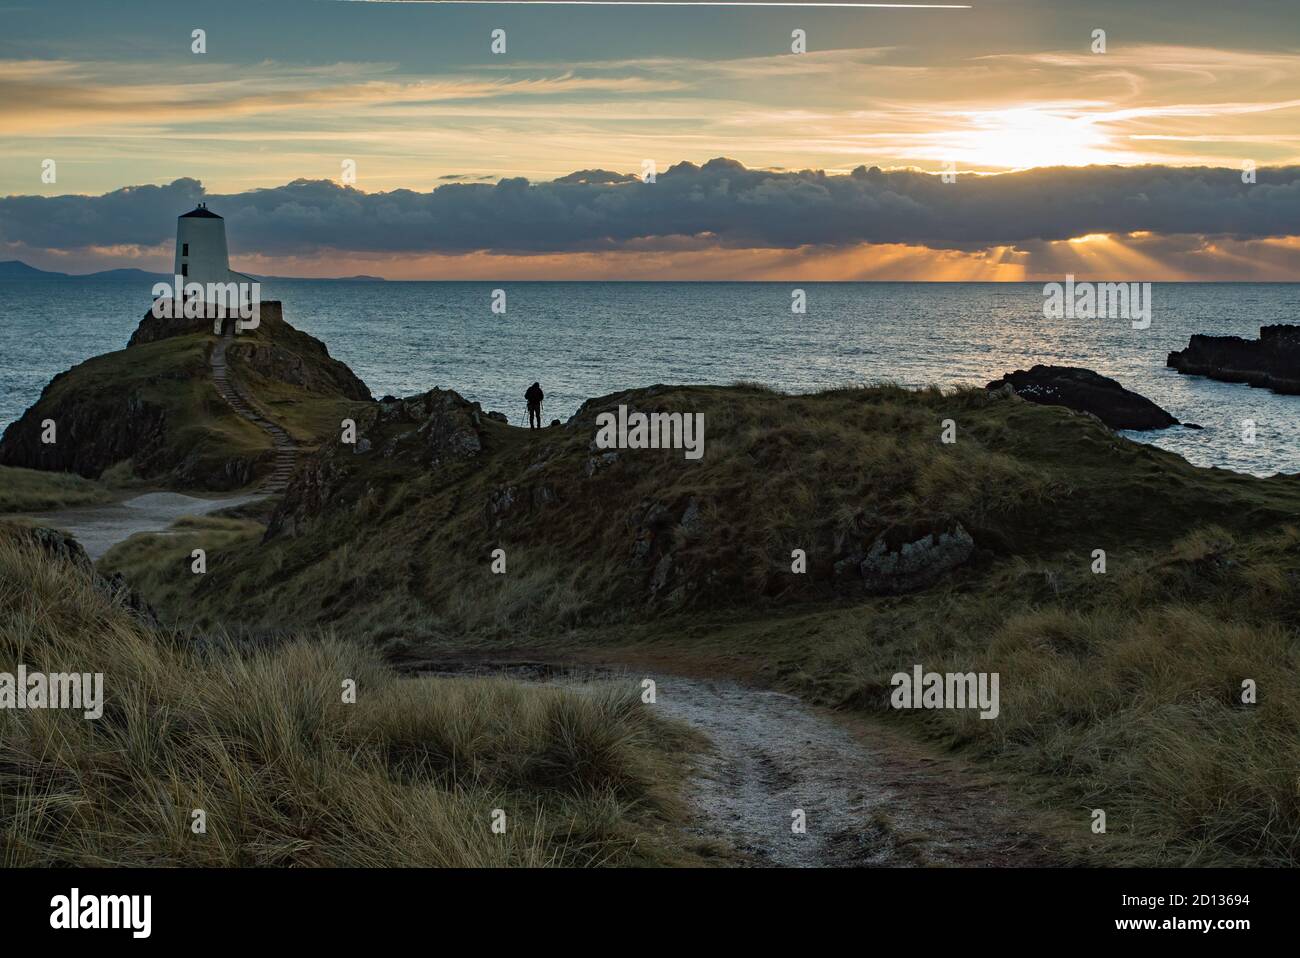 Photographer getting a shot of the lighthouse at Llanddwyn, Anglesey, Wales at sunset. Stock Photo